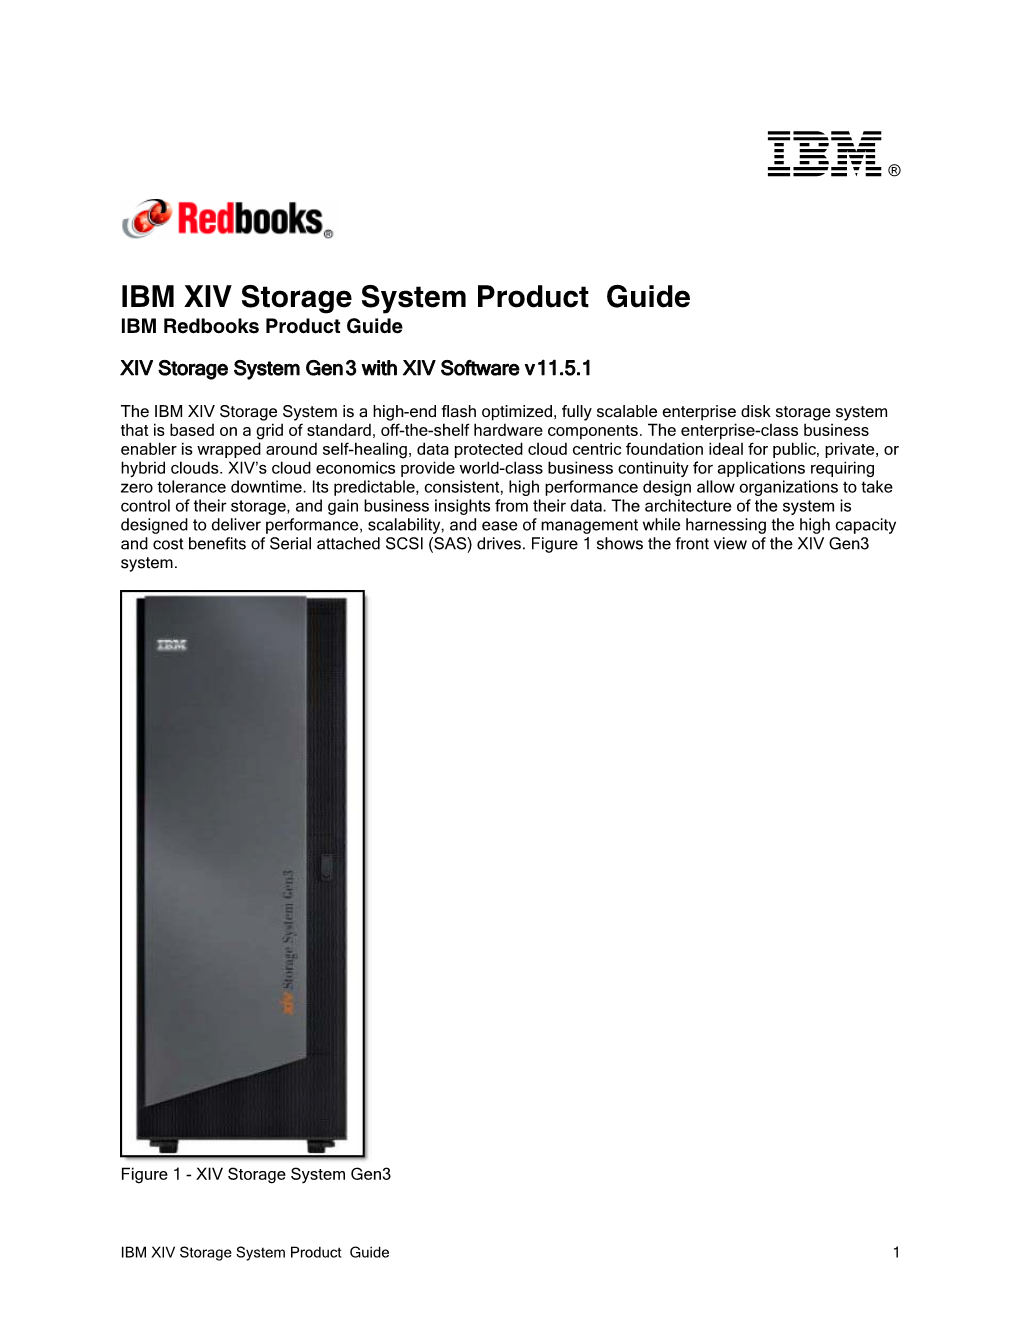 IBM XIV Storage System Product Guide IBM Redbooks Product Guide